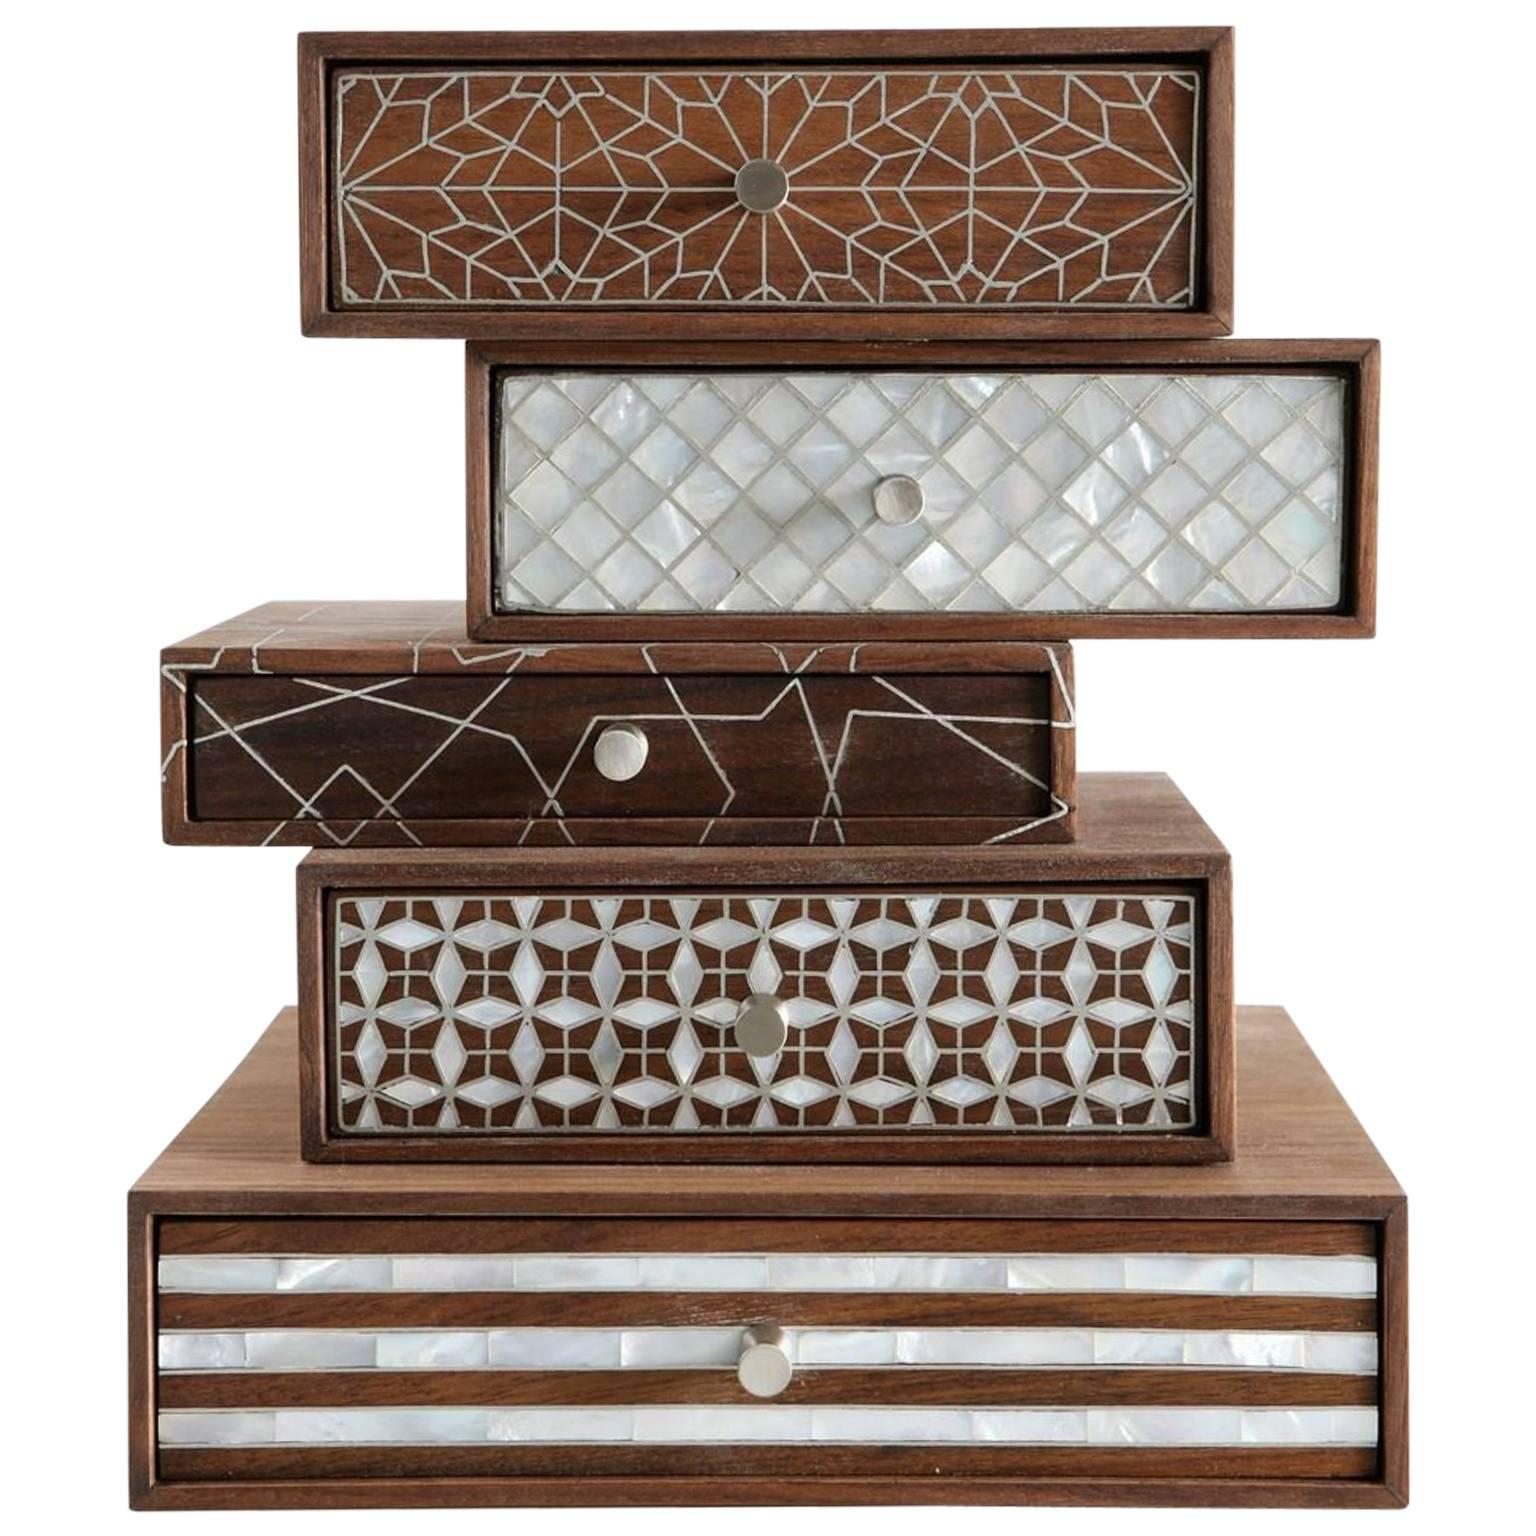 Patchwork Boxes by Nada Debs, Stackable Boxes with Mother-of-Pearl Inlay